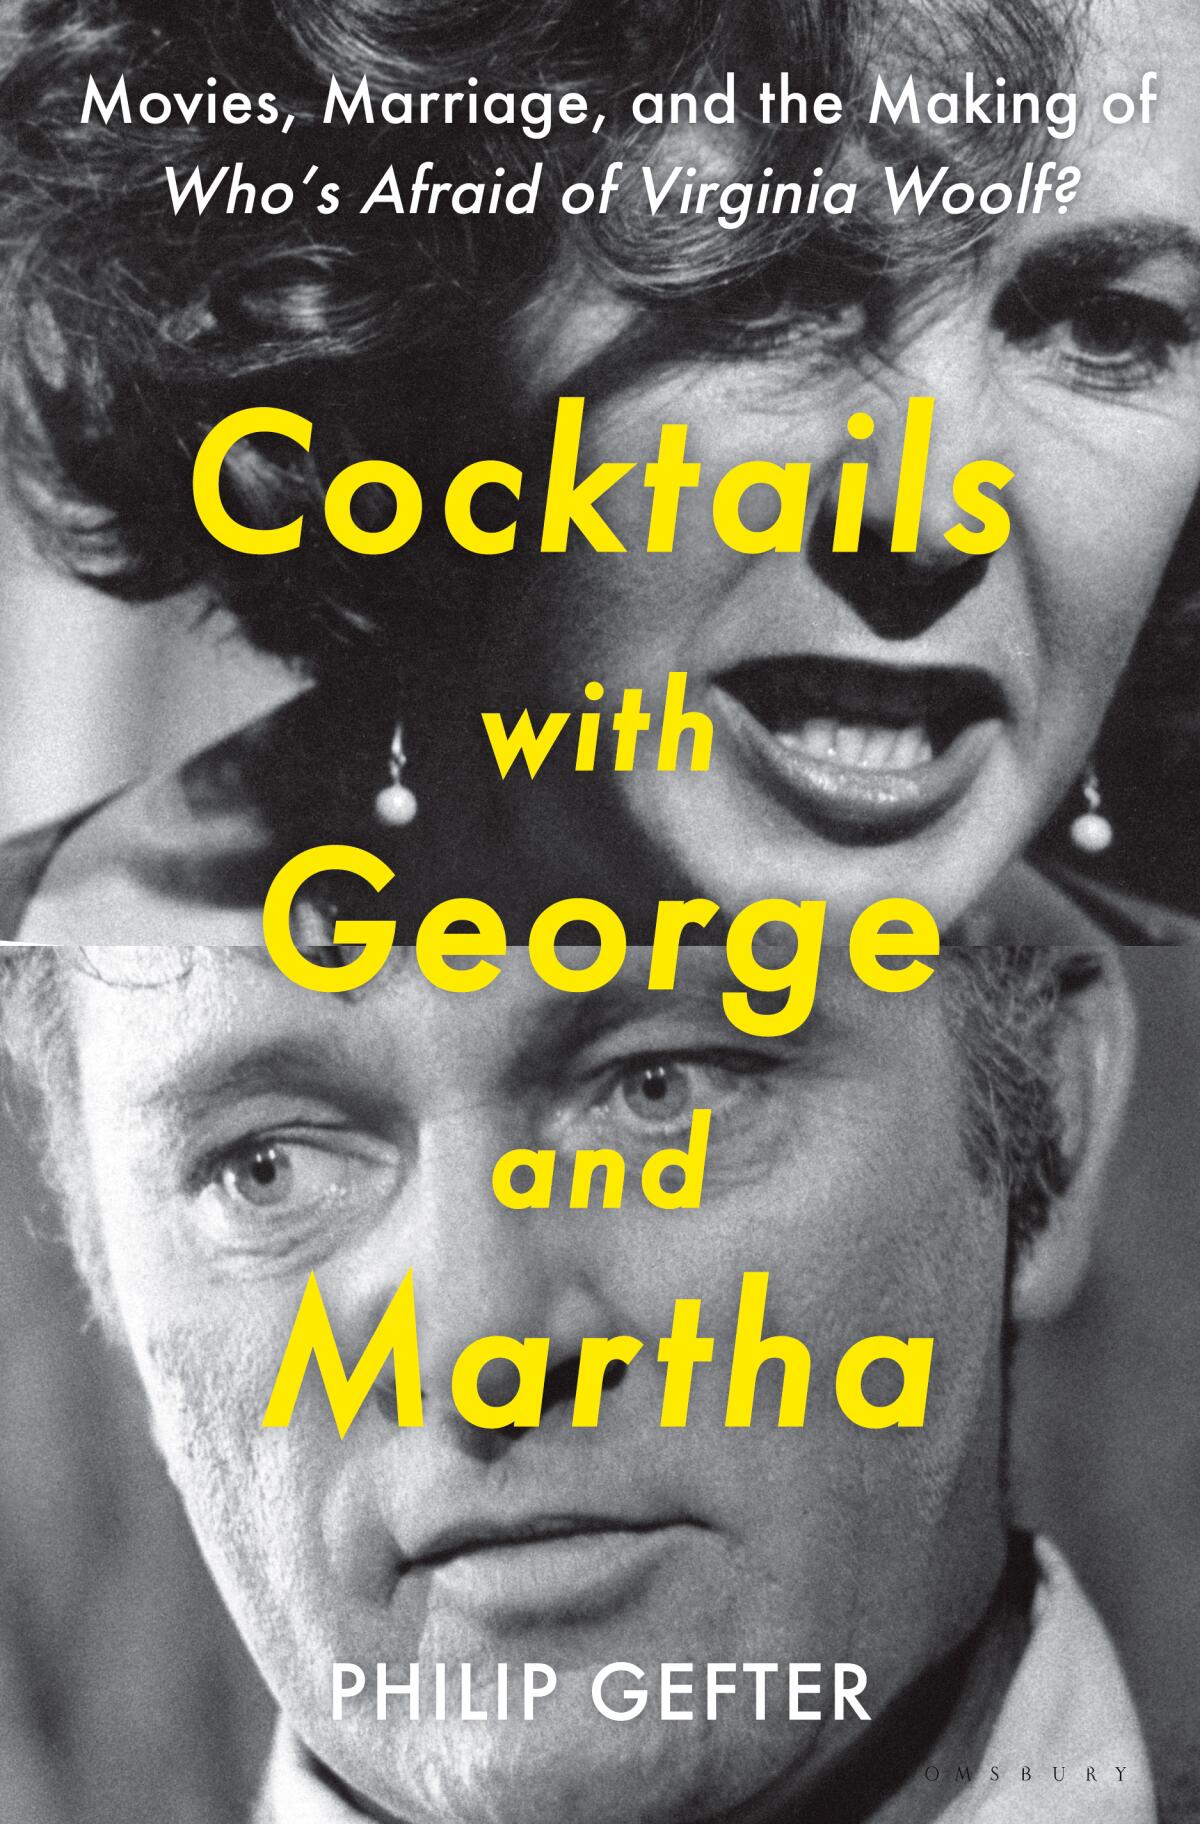 The book cover of "Cocktails with George and Martha" by Philip Gefter.